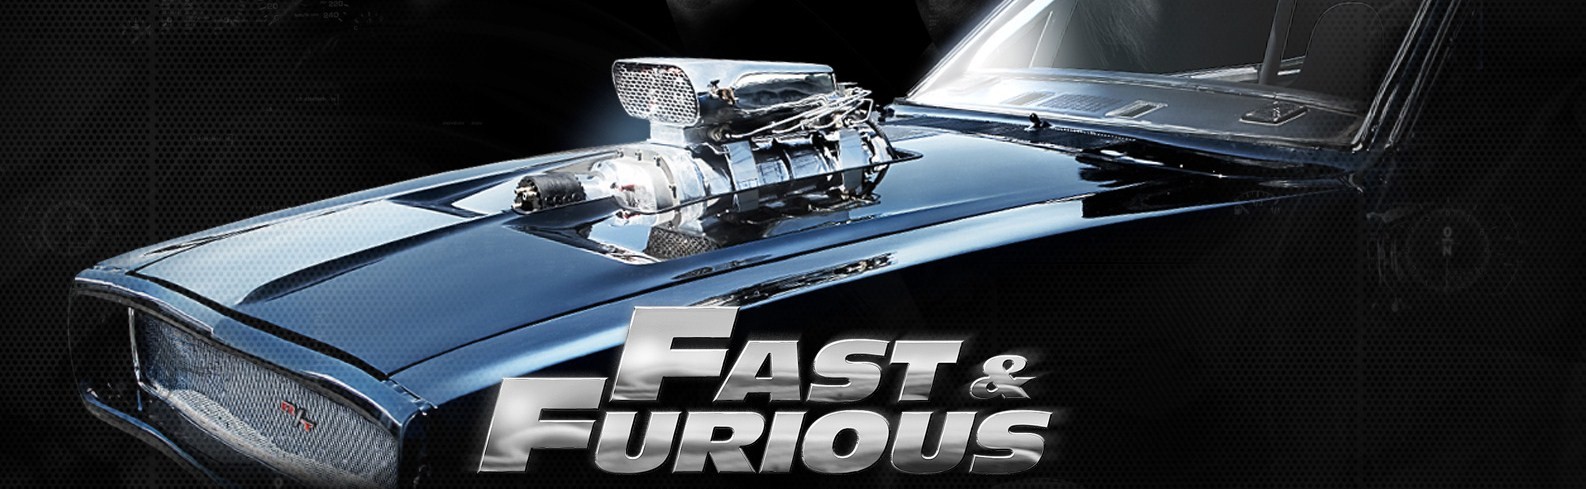 vin diesel car in fast and furious. vin diesel fast and furious 1.